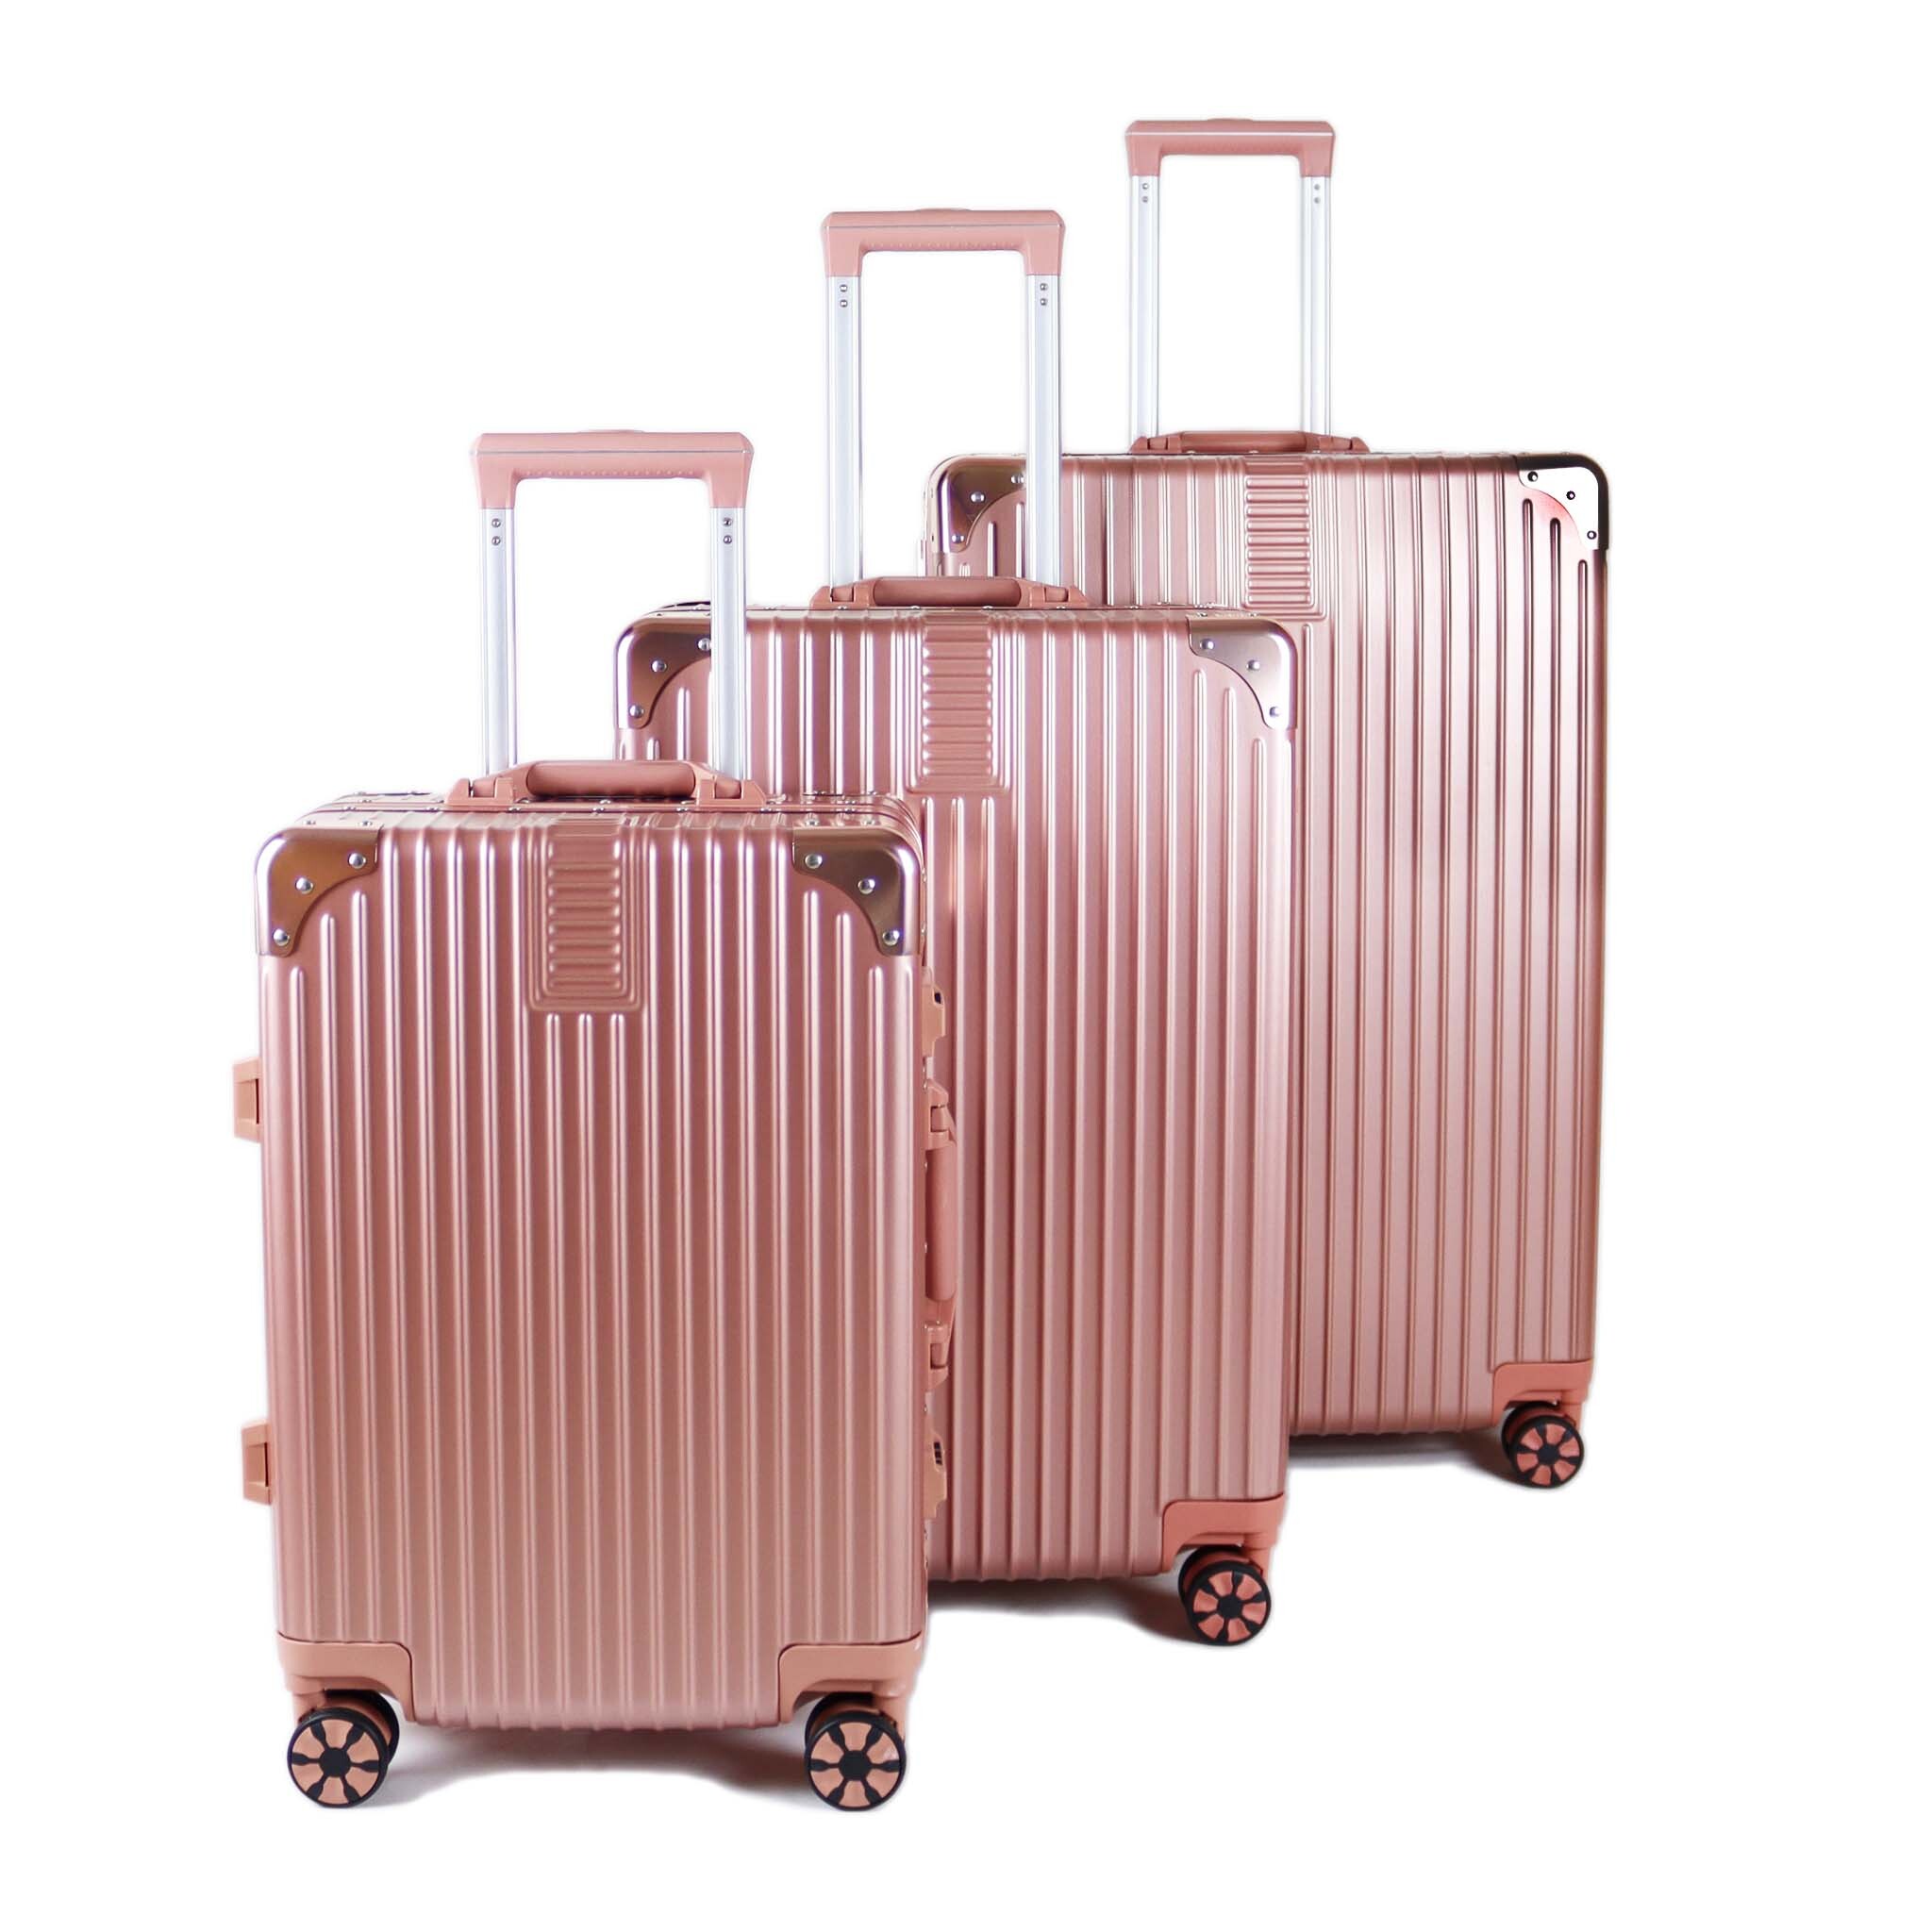 LUGGAGE DISTRICT ALUMINUM FRAME ULTRA-LIGHT CARRY-ON SMALL BAG 20INCH, ROSE GOLD